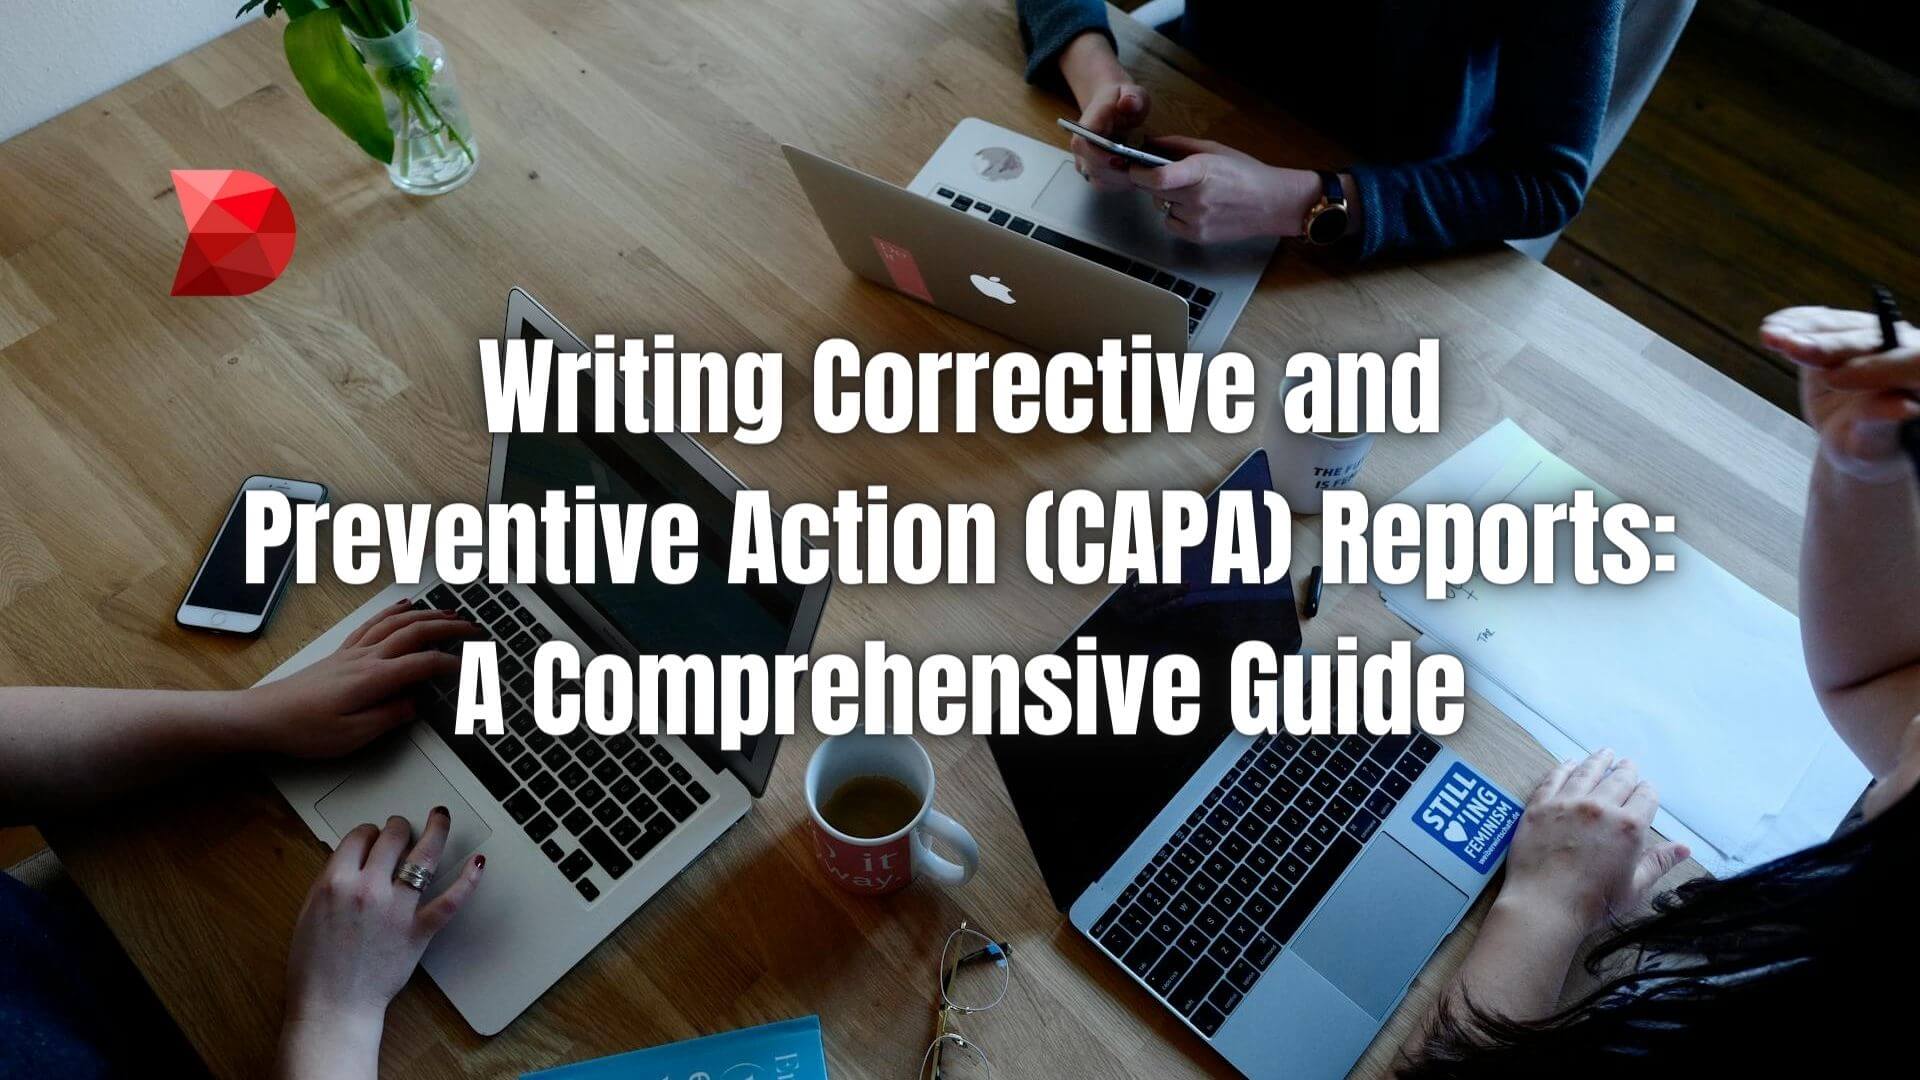 Unlock success with our guide to writing CAPA reports. Click here to learn best practices for effective corrective and preventive actions.